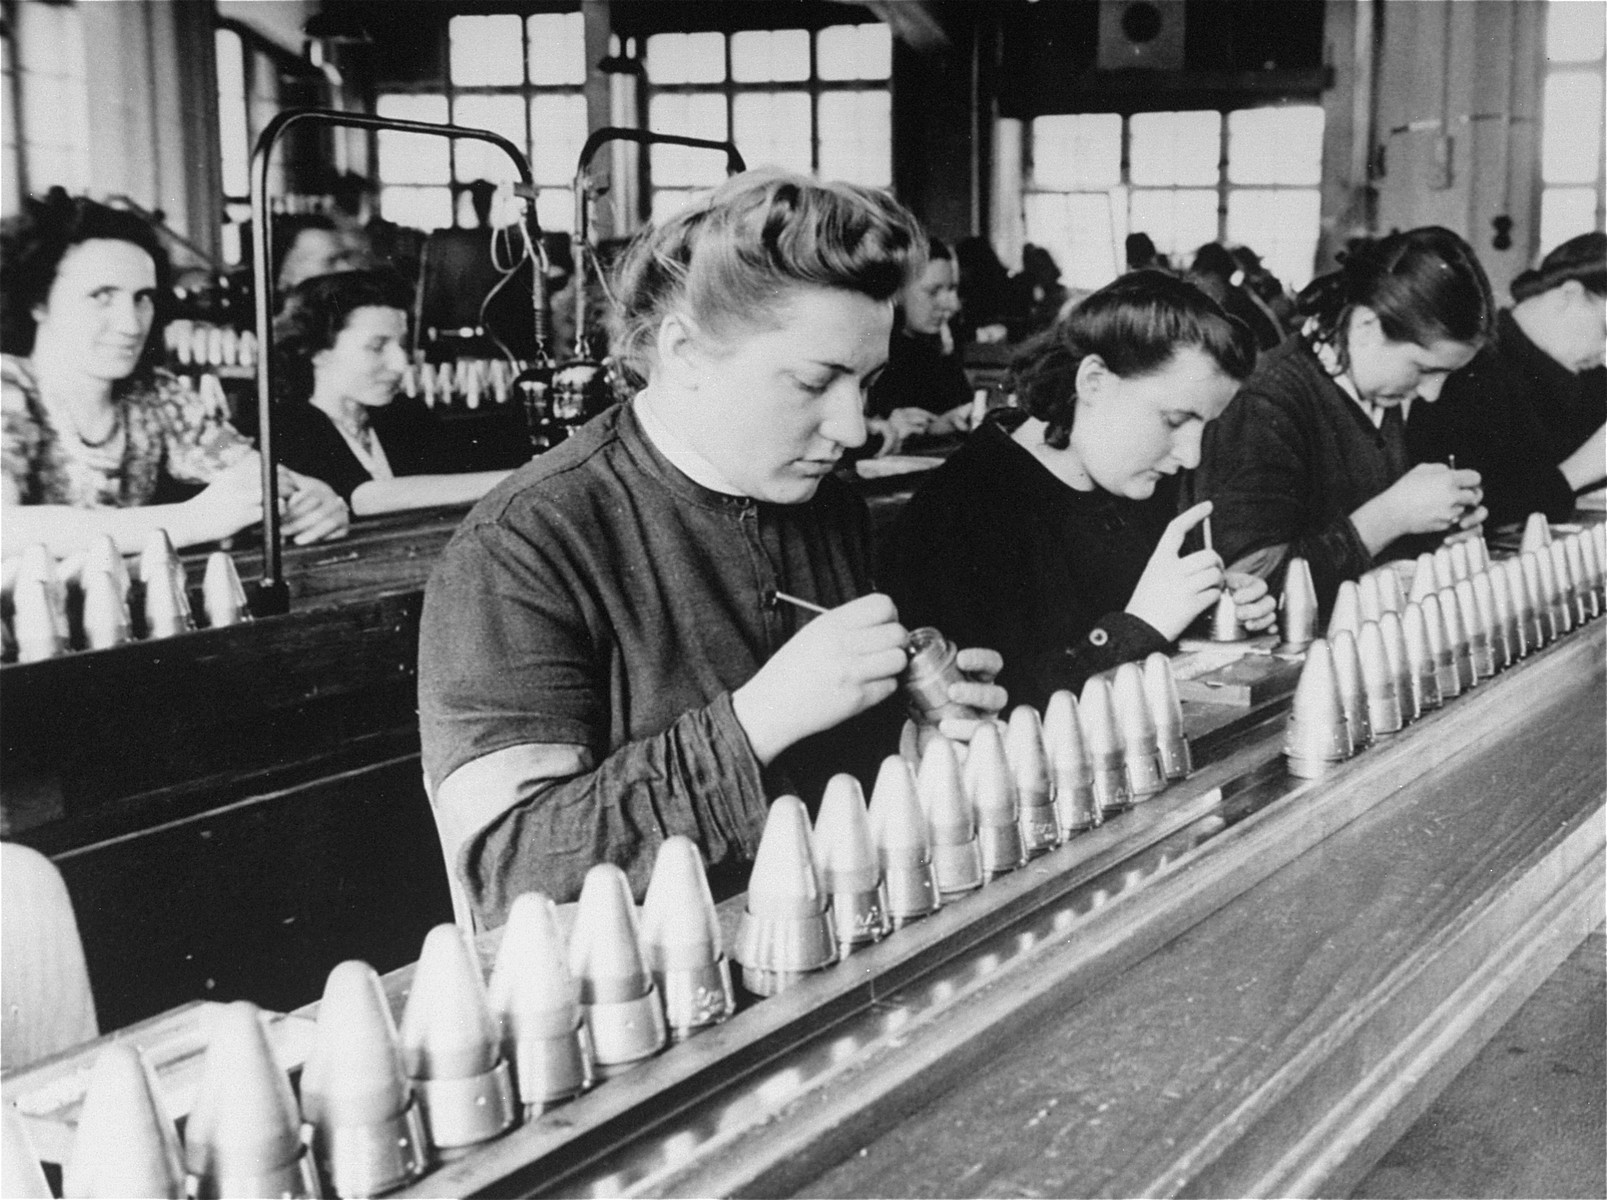 Female foreign workers (in dark clothing) from the Stadelheim prison work in a factory owned by the AGFA camera company.

This photograph was submitted in evidence as part of the case against I.G. Farben.